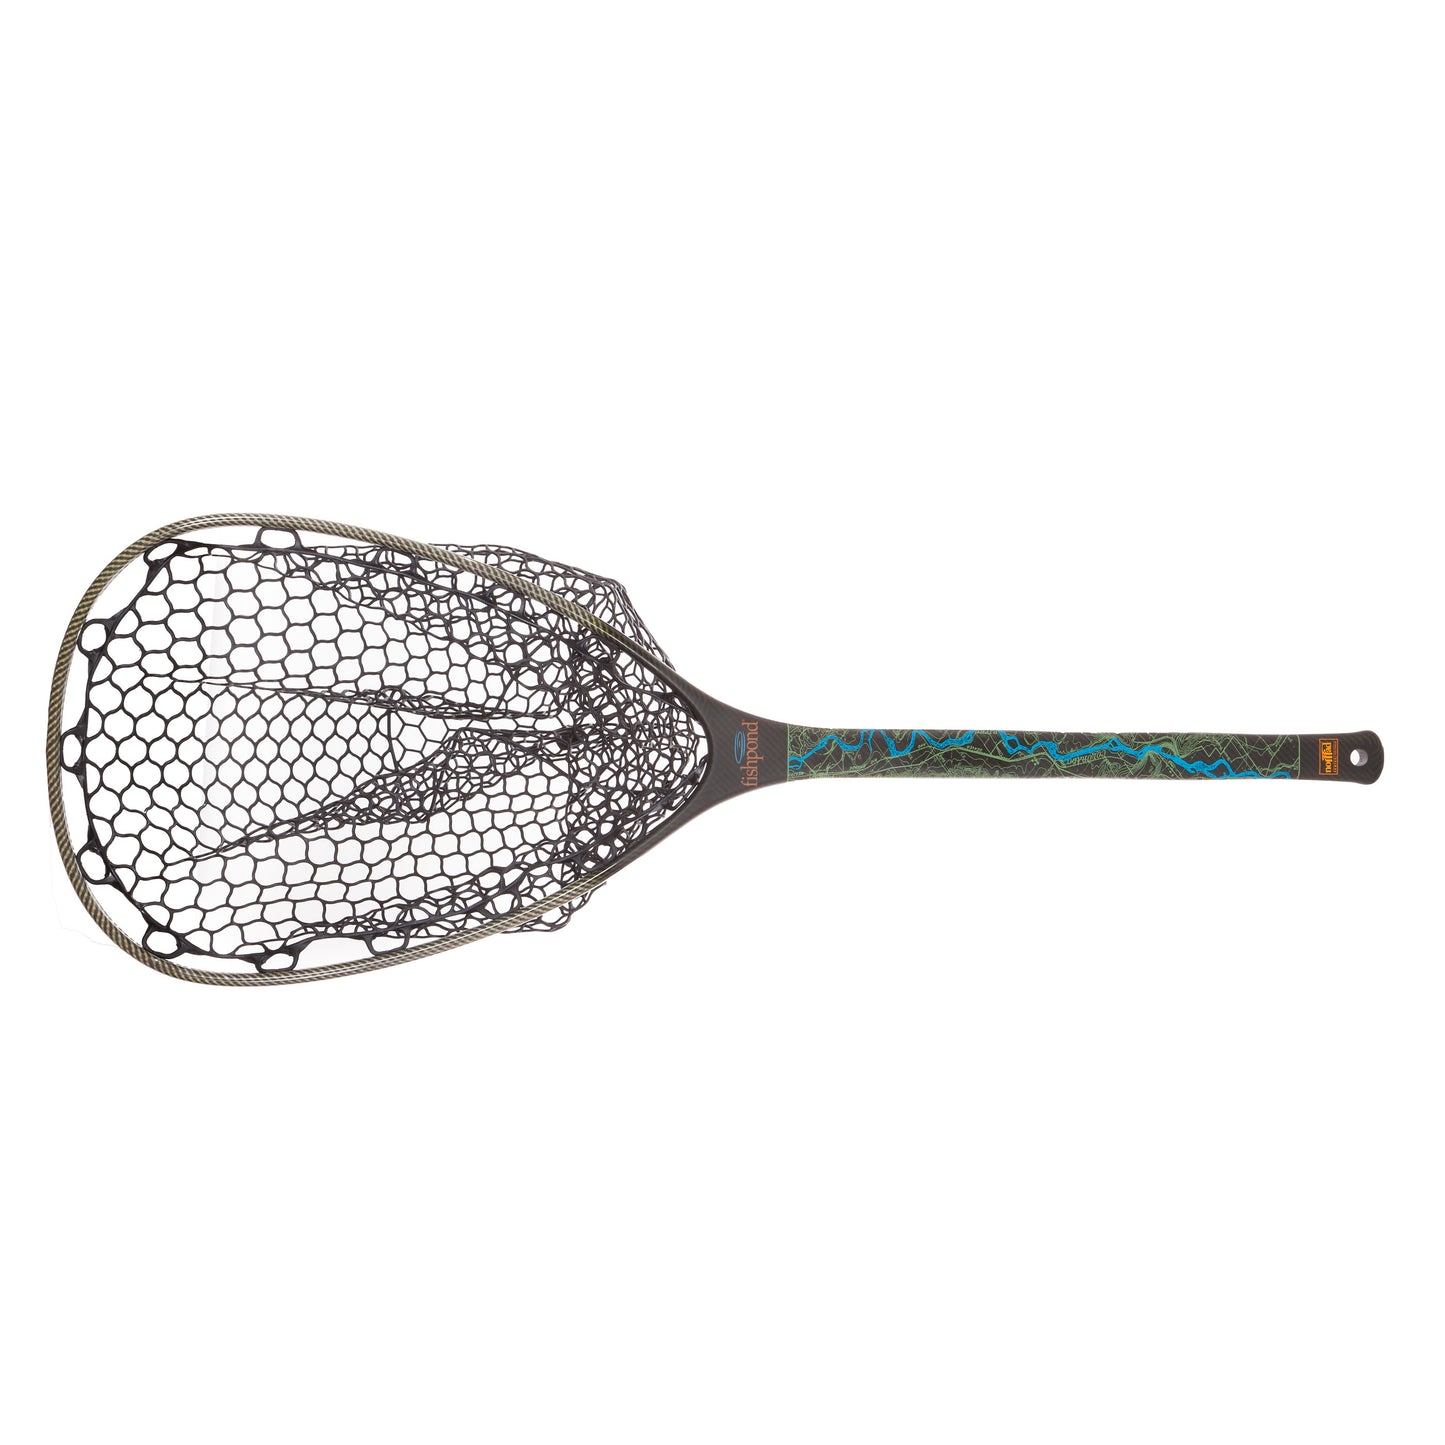 Fishpond Nomad Mid Length Net - American Rivers Edition